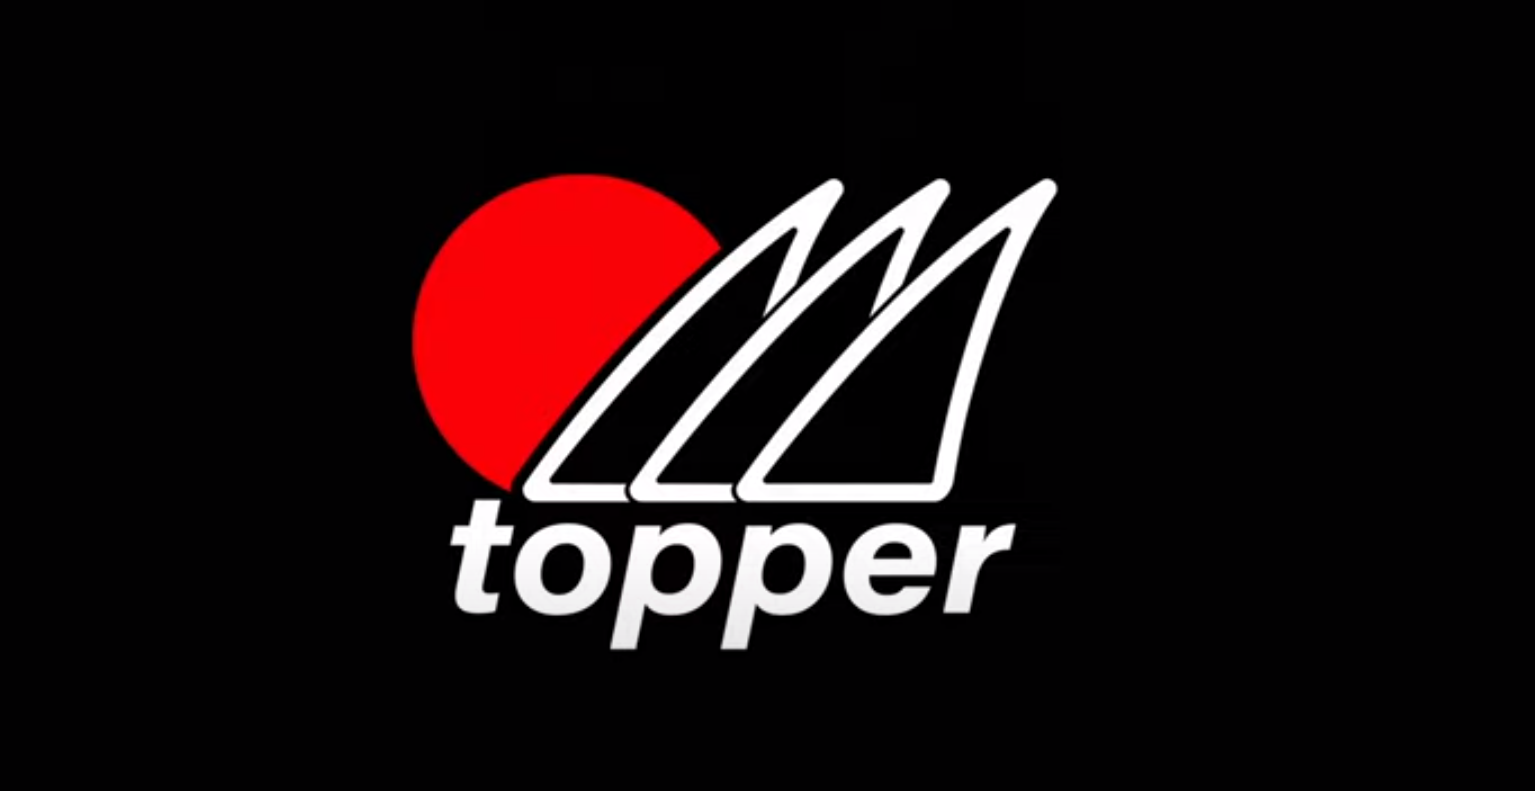 Why Topper?